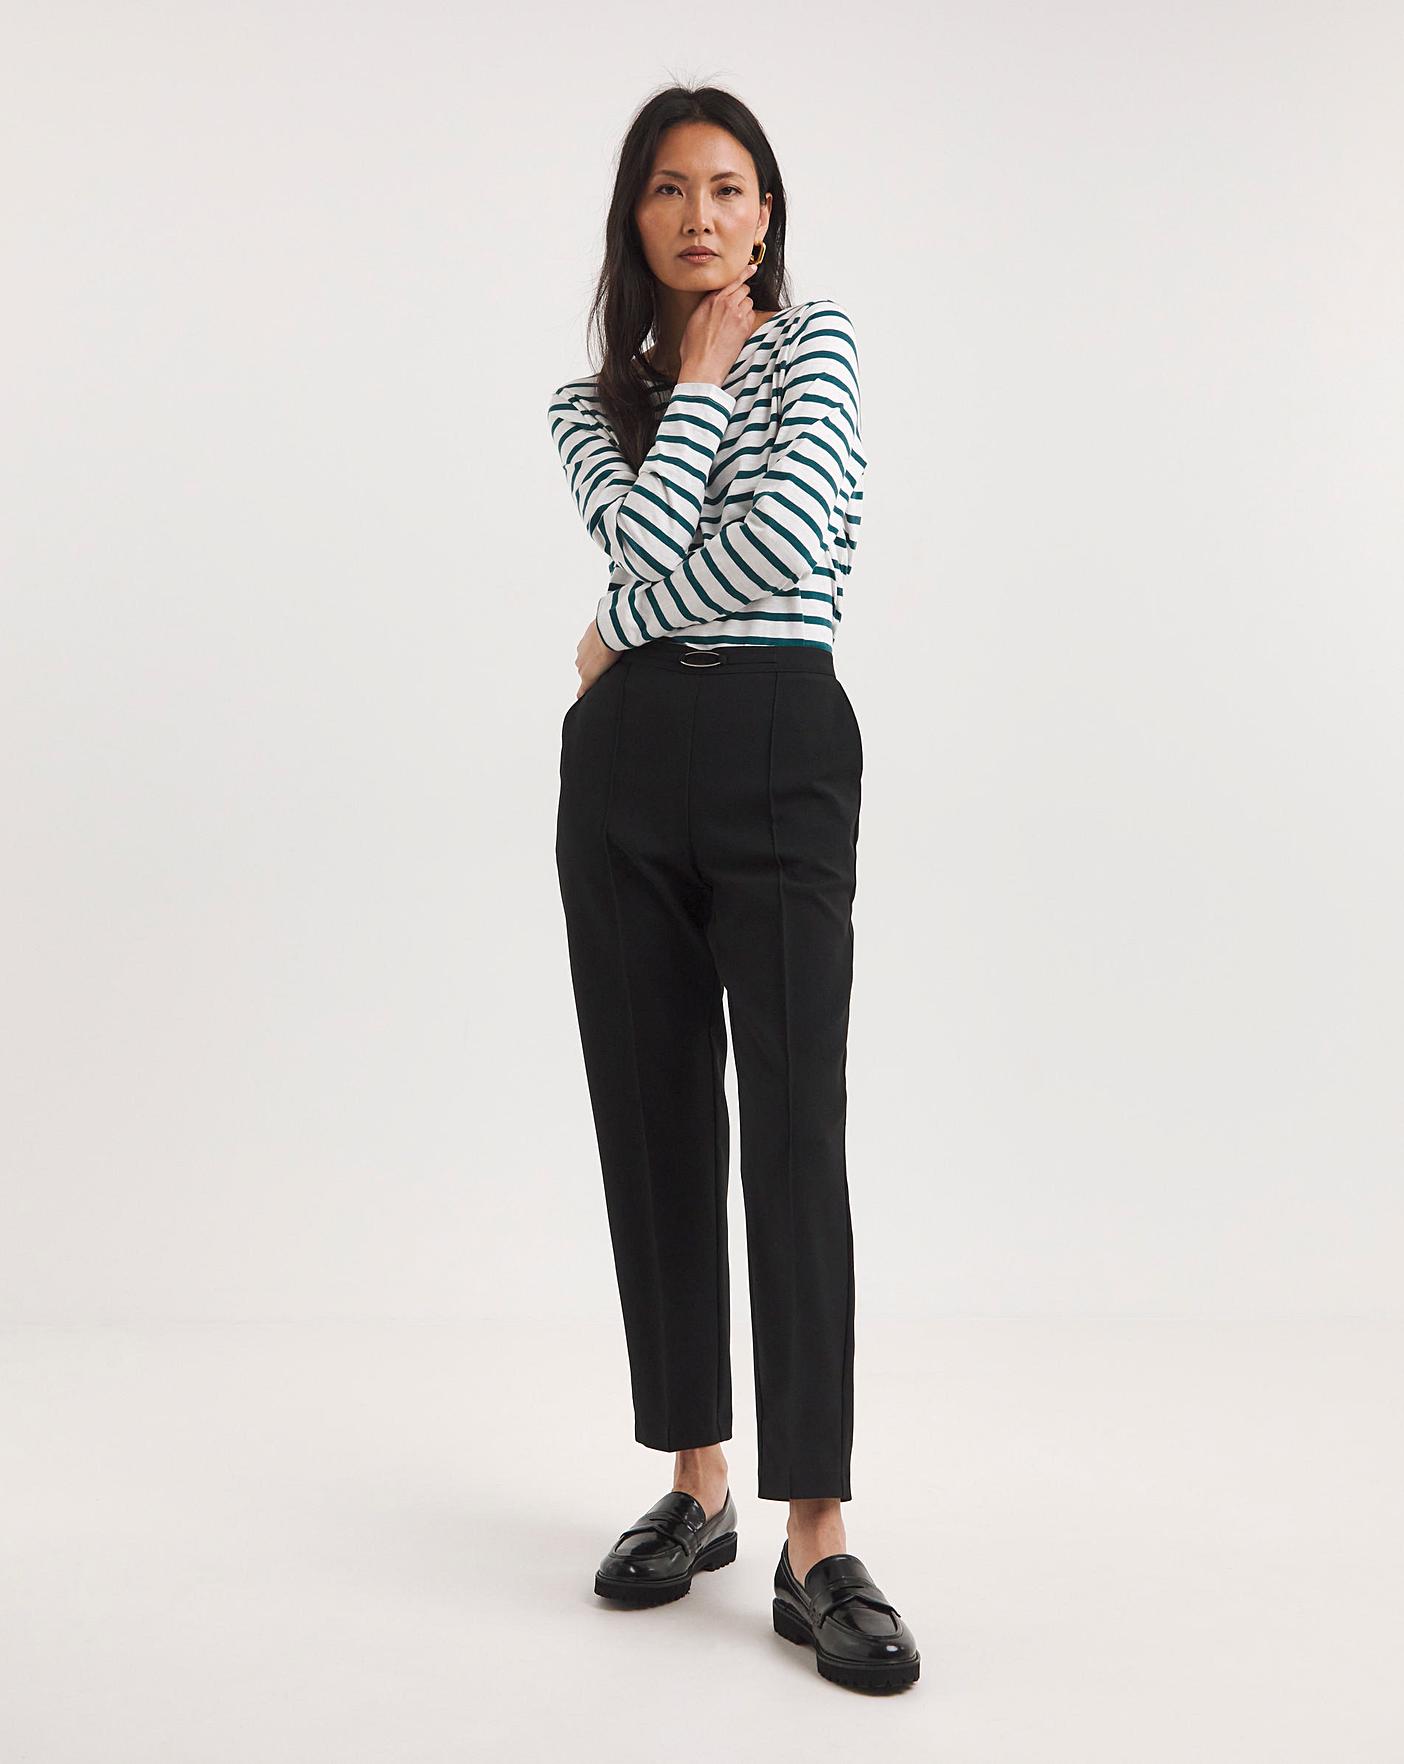 Slimma Pull on Trouser Regular | Oxendales